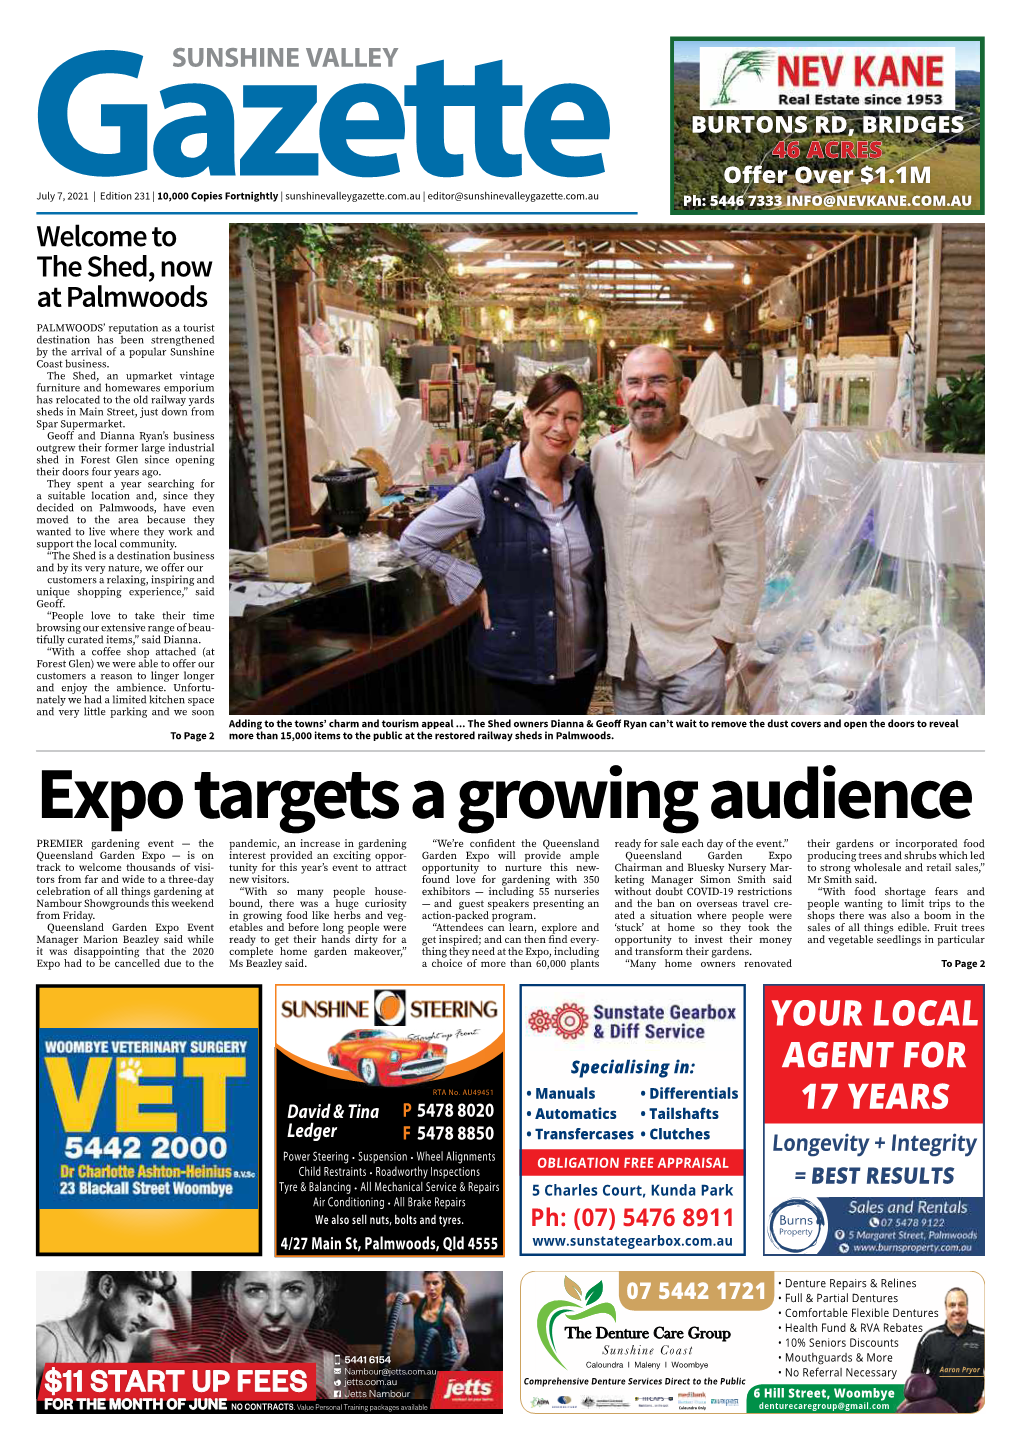 Expo Targets a Growing Audience